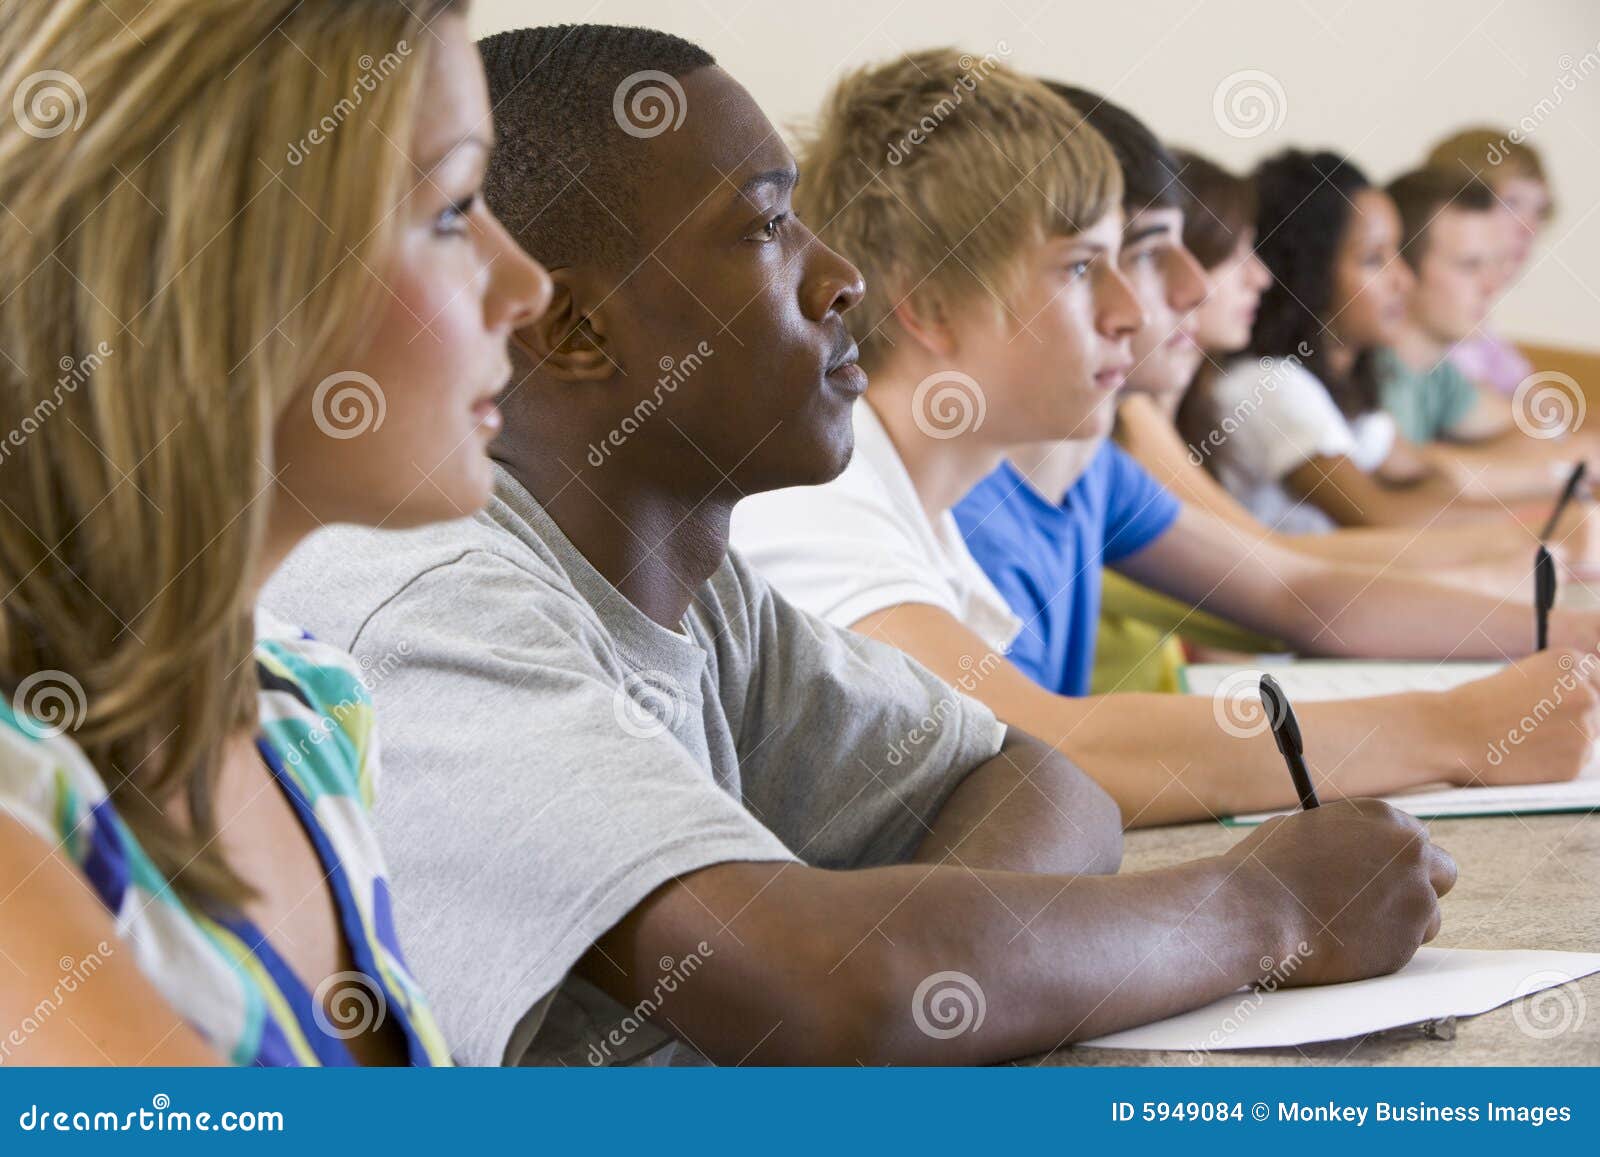 college students listening to a university lecture